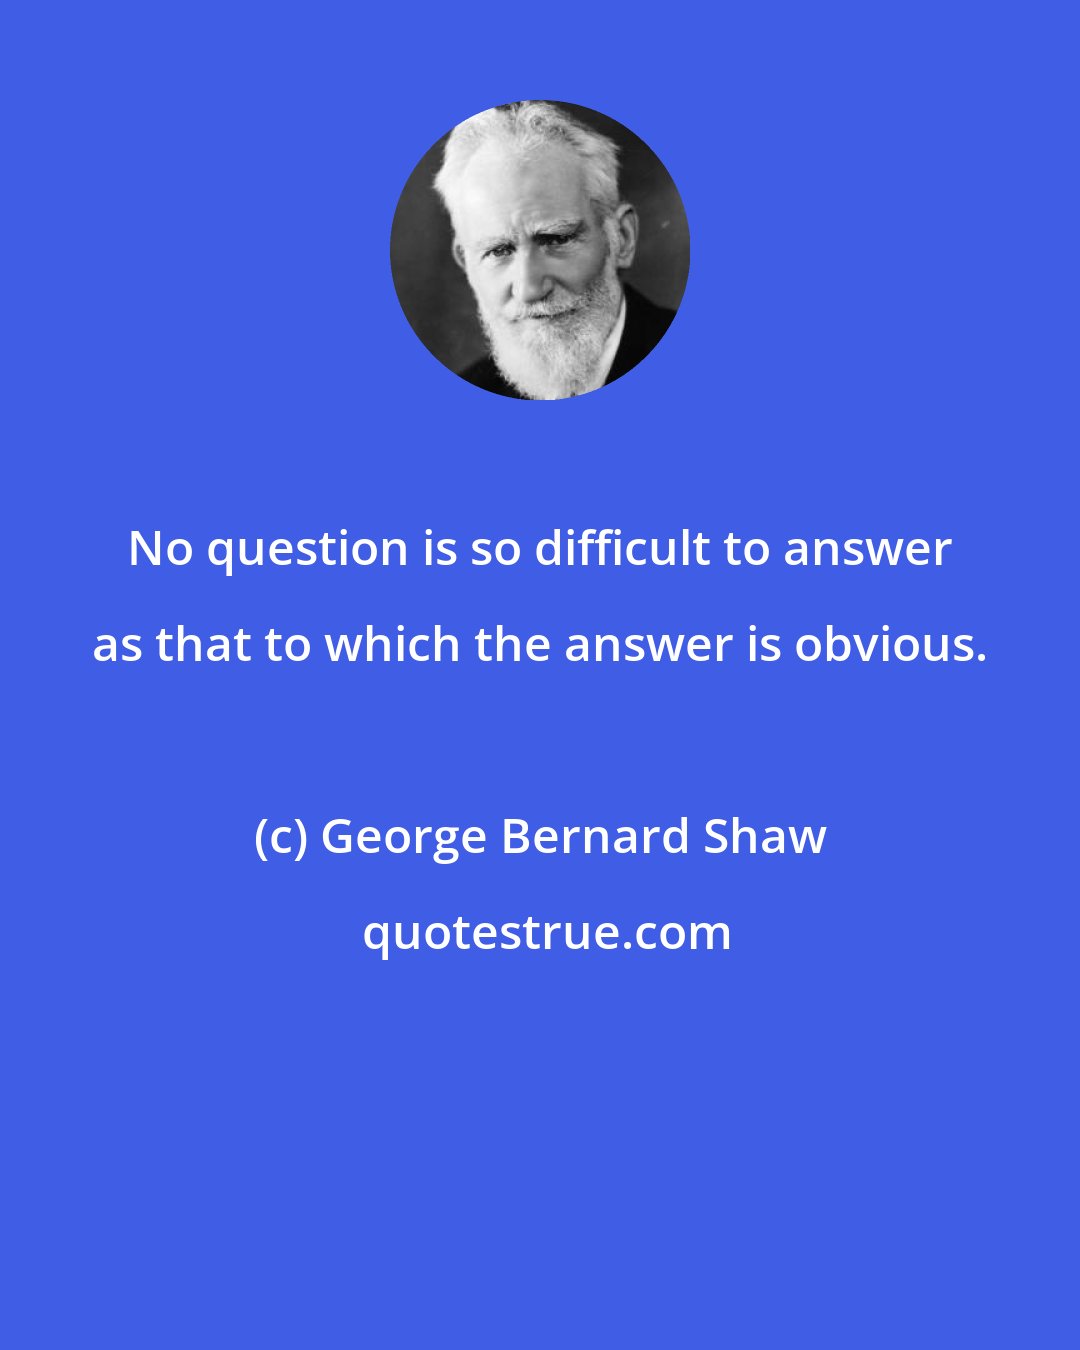 George Bernard Shaw: No question is so difficult to answer as that to which the answer is obvious.